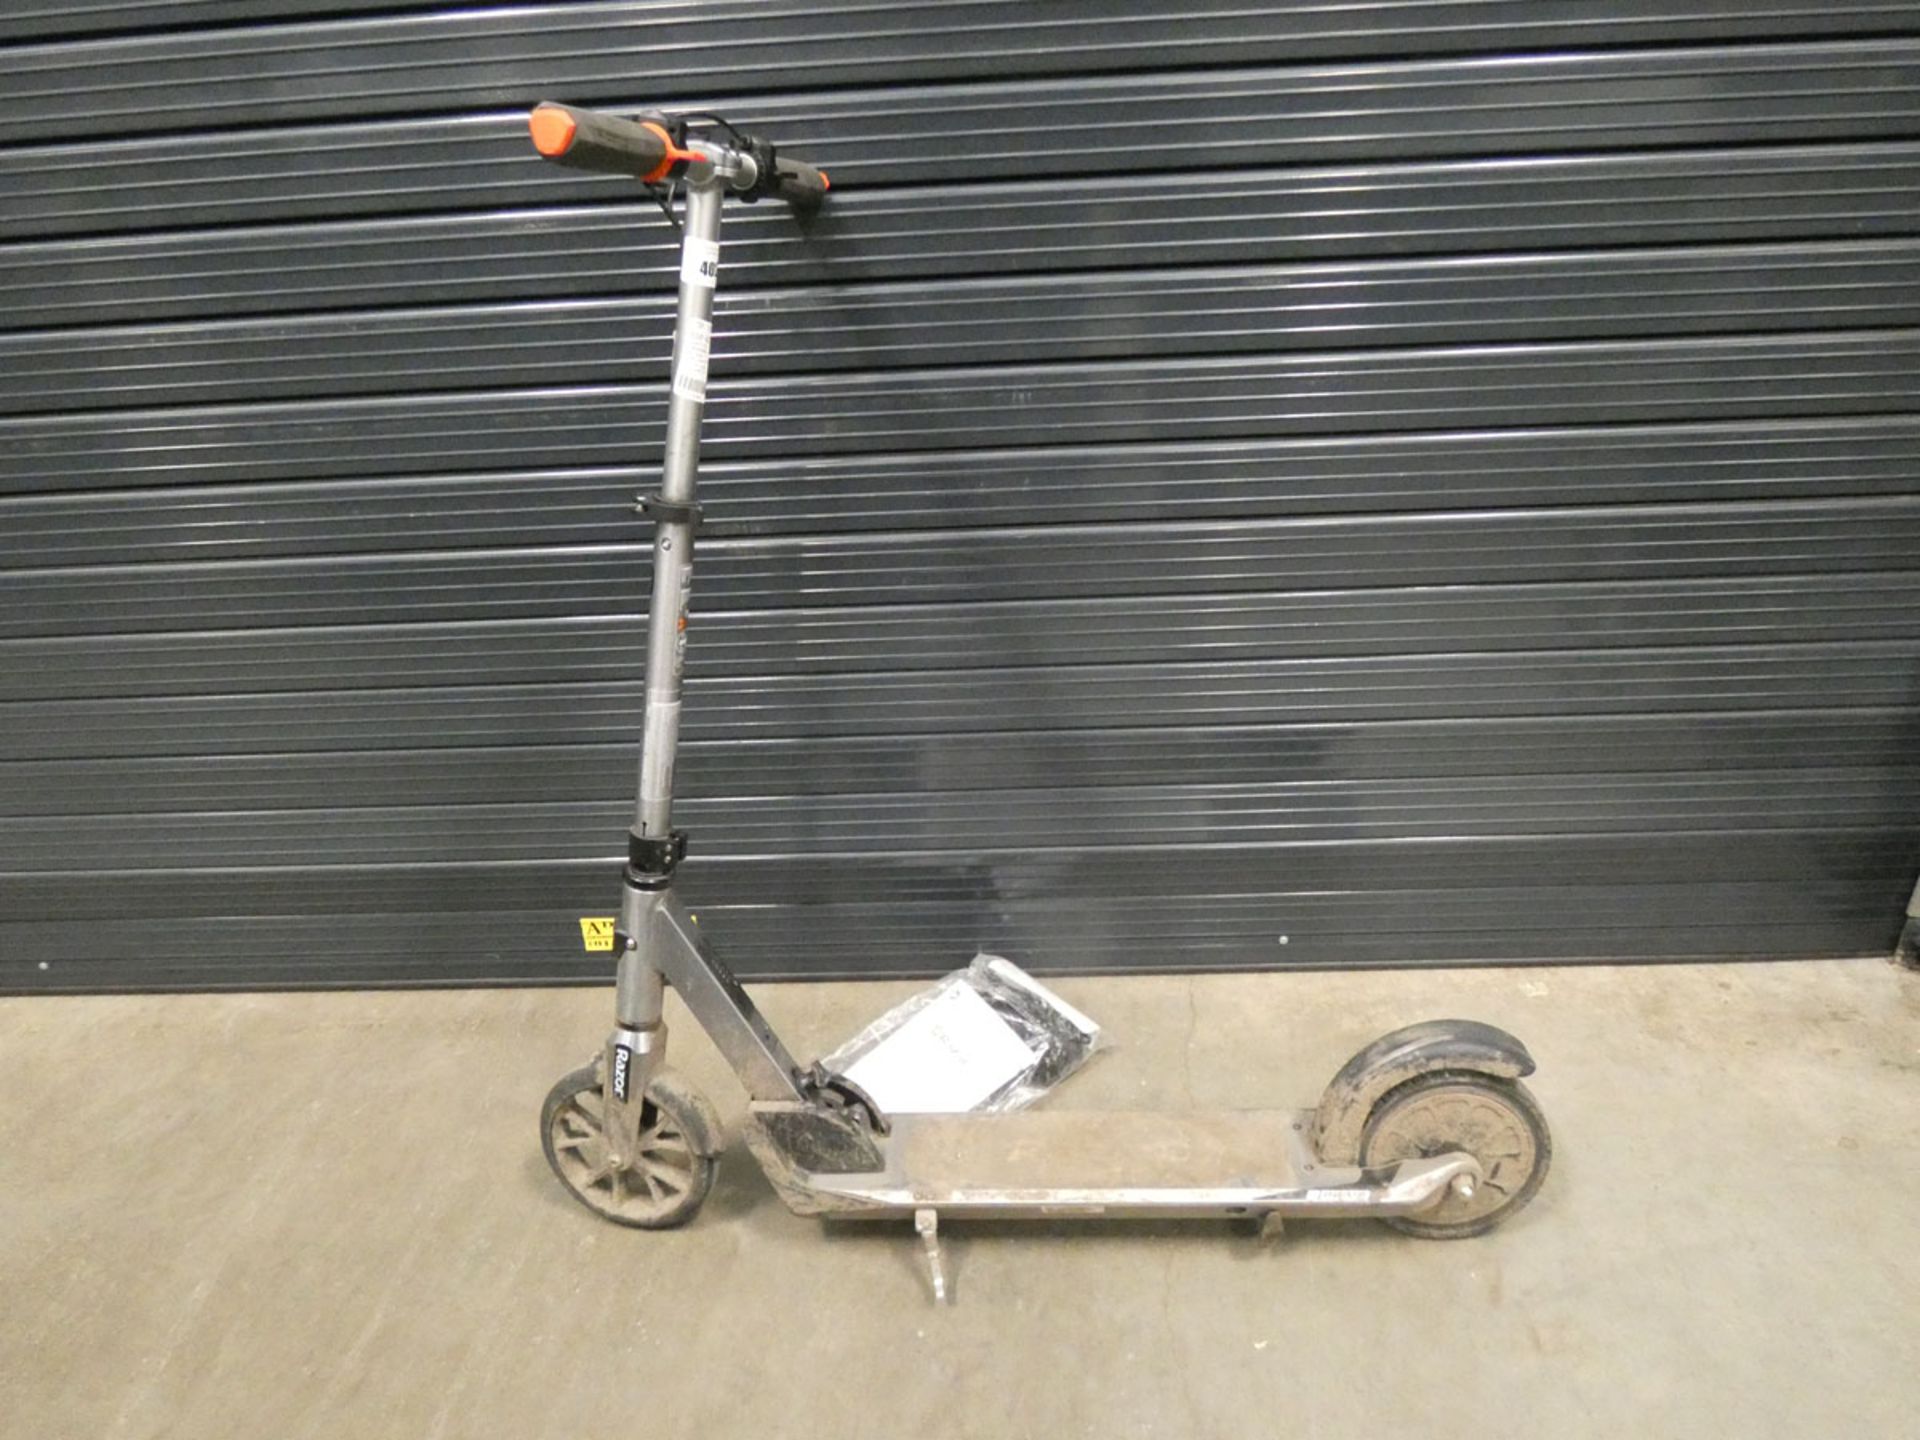 Razor electric scooter with charger